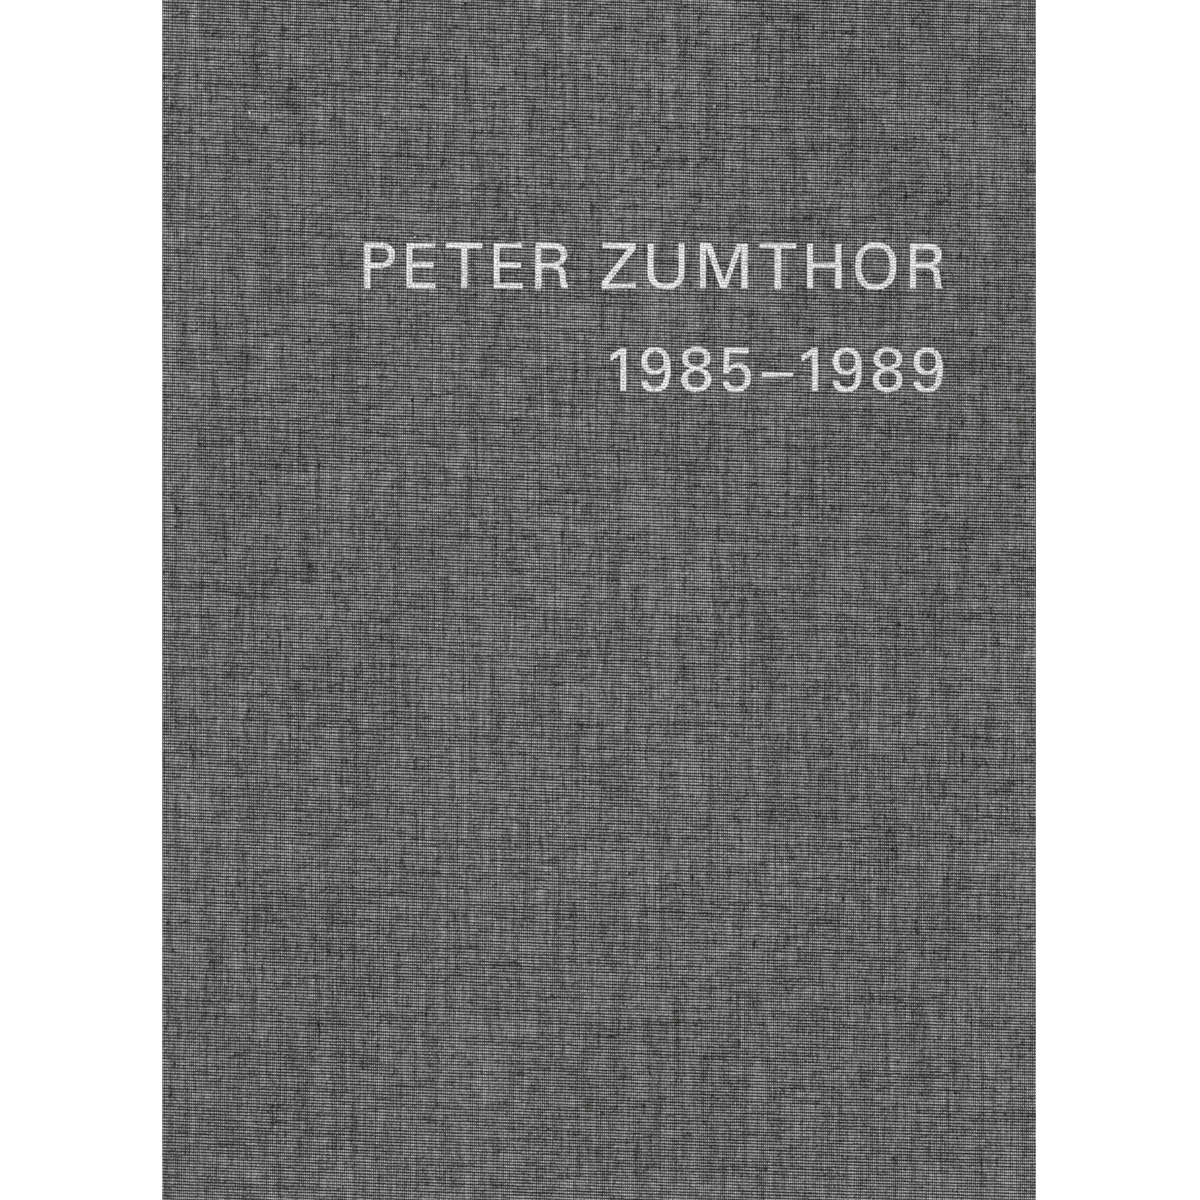 Peter Zumthor. Buildings and Projects, 1985-2013